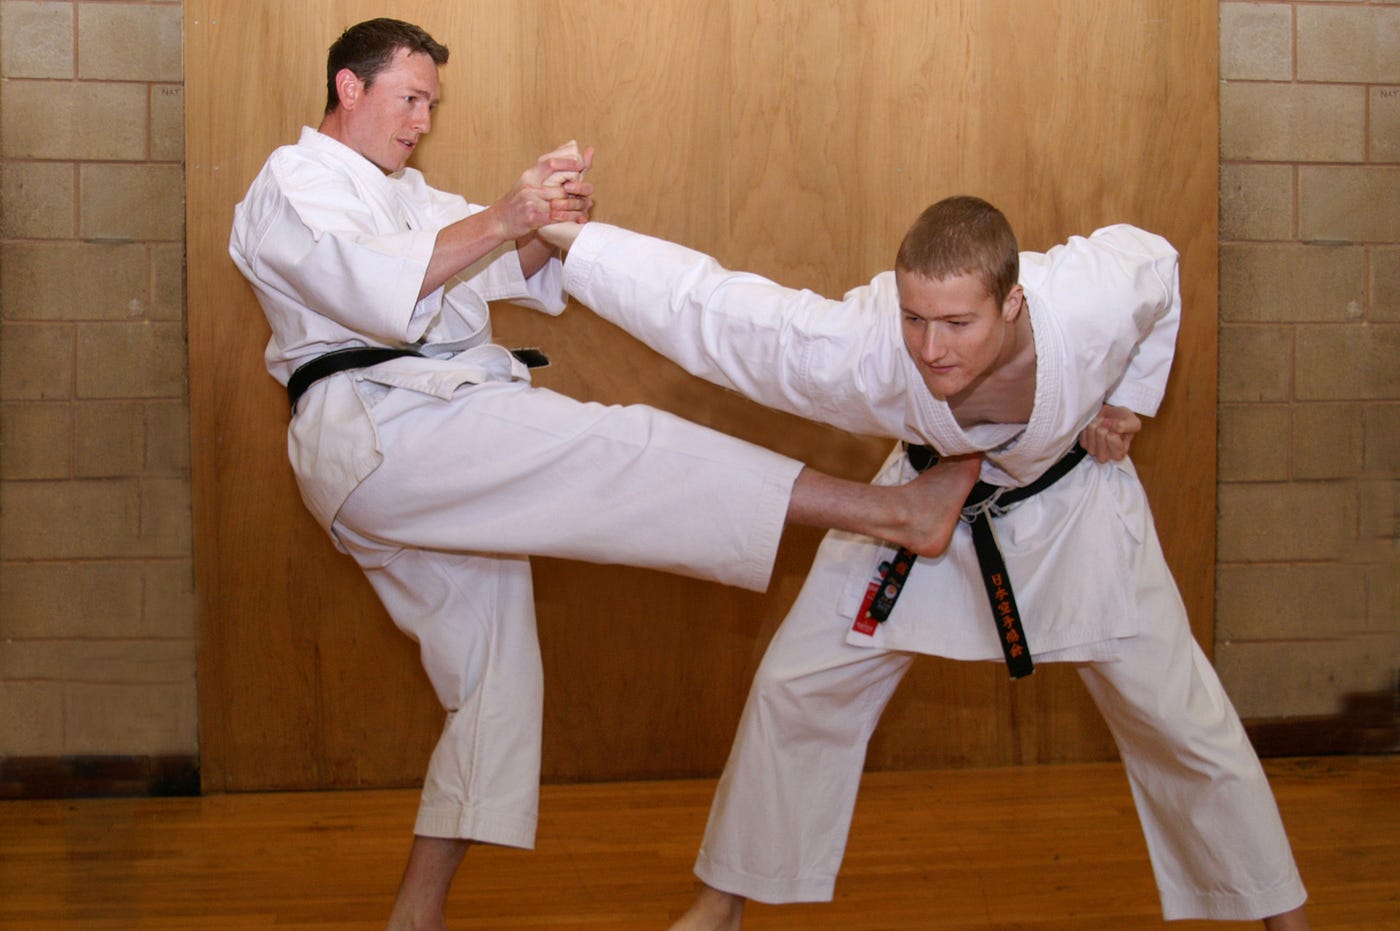 What are the differences between karate and Chinese martial arts? Which one  is best for self-defense purposes? - Quora